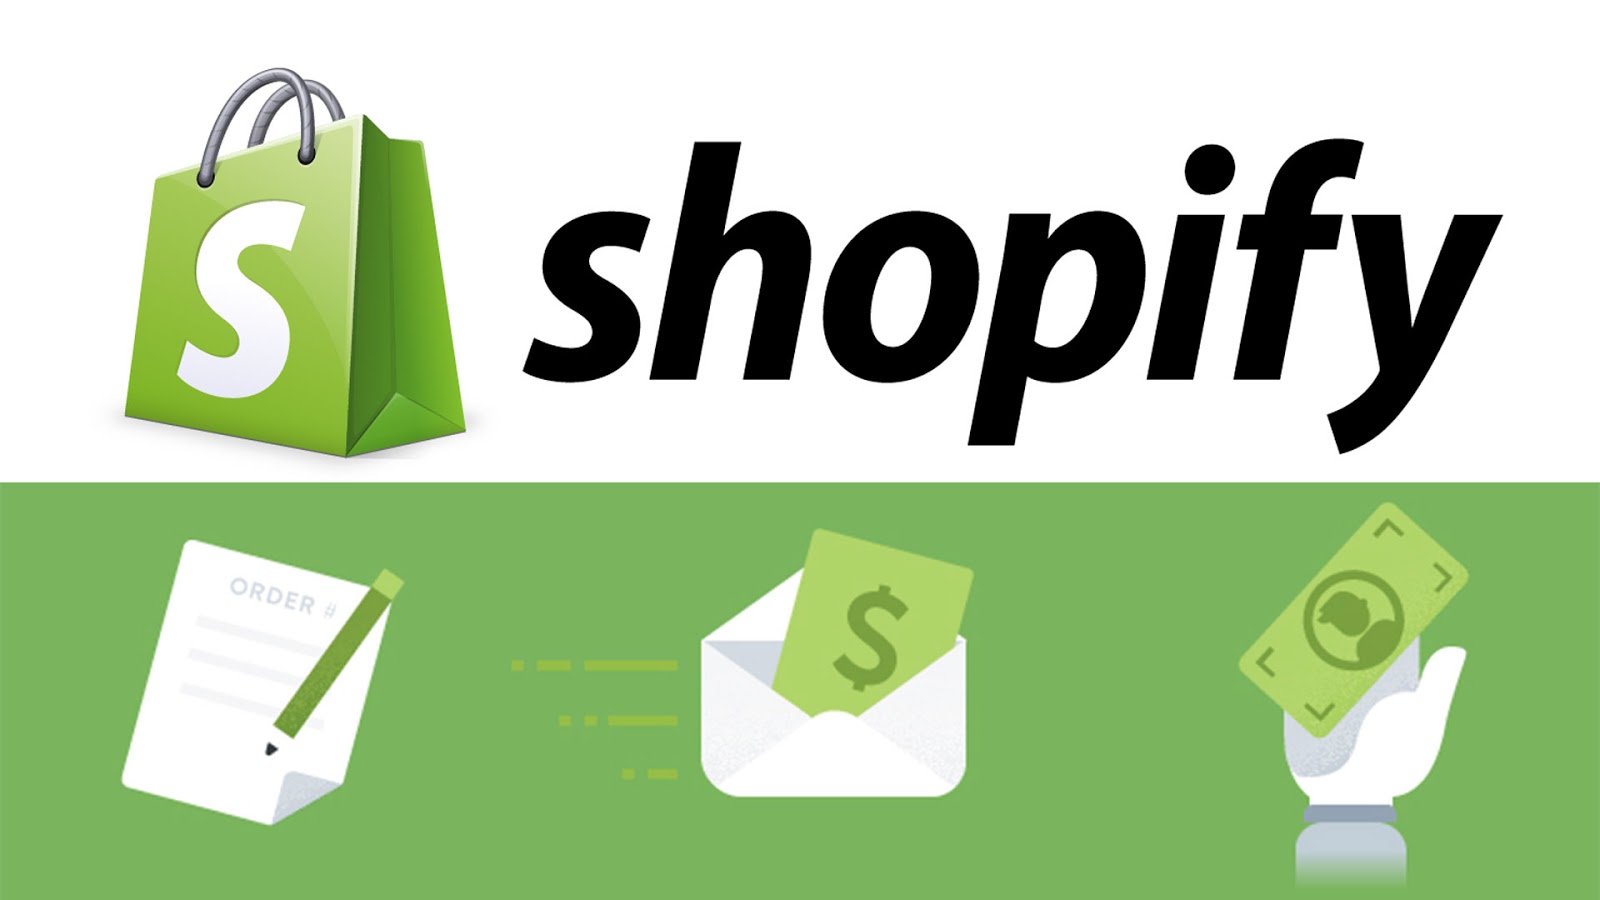 Learn About Ecommerce With a Paid Shopify Internship 2